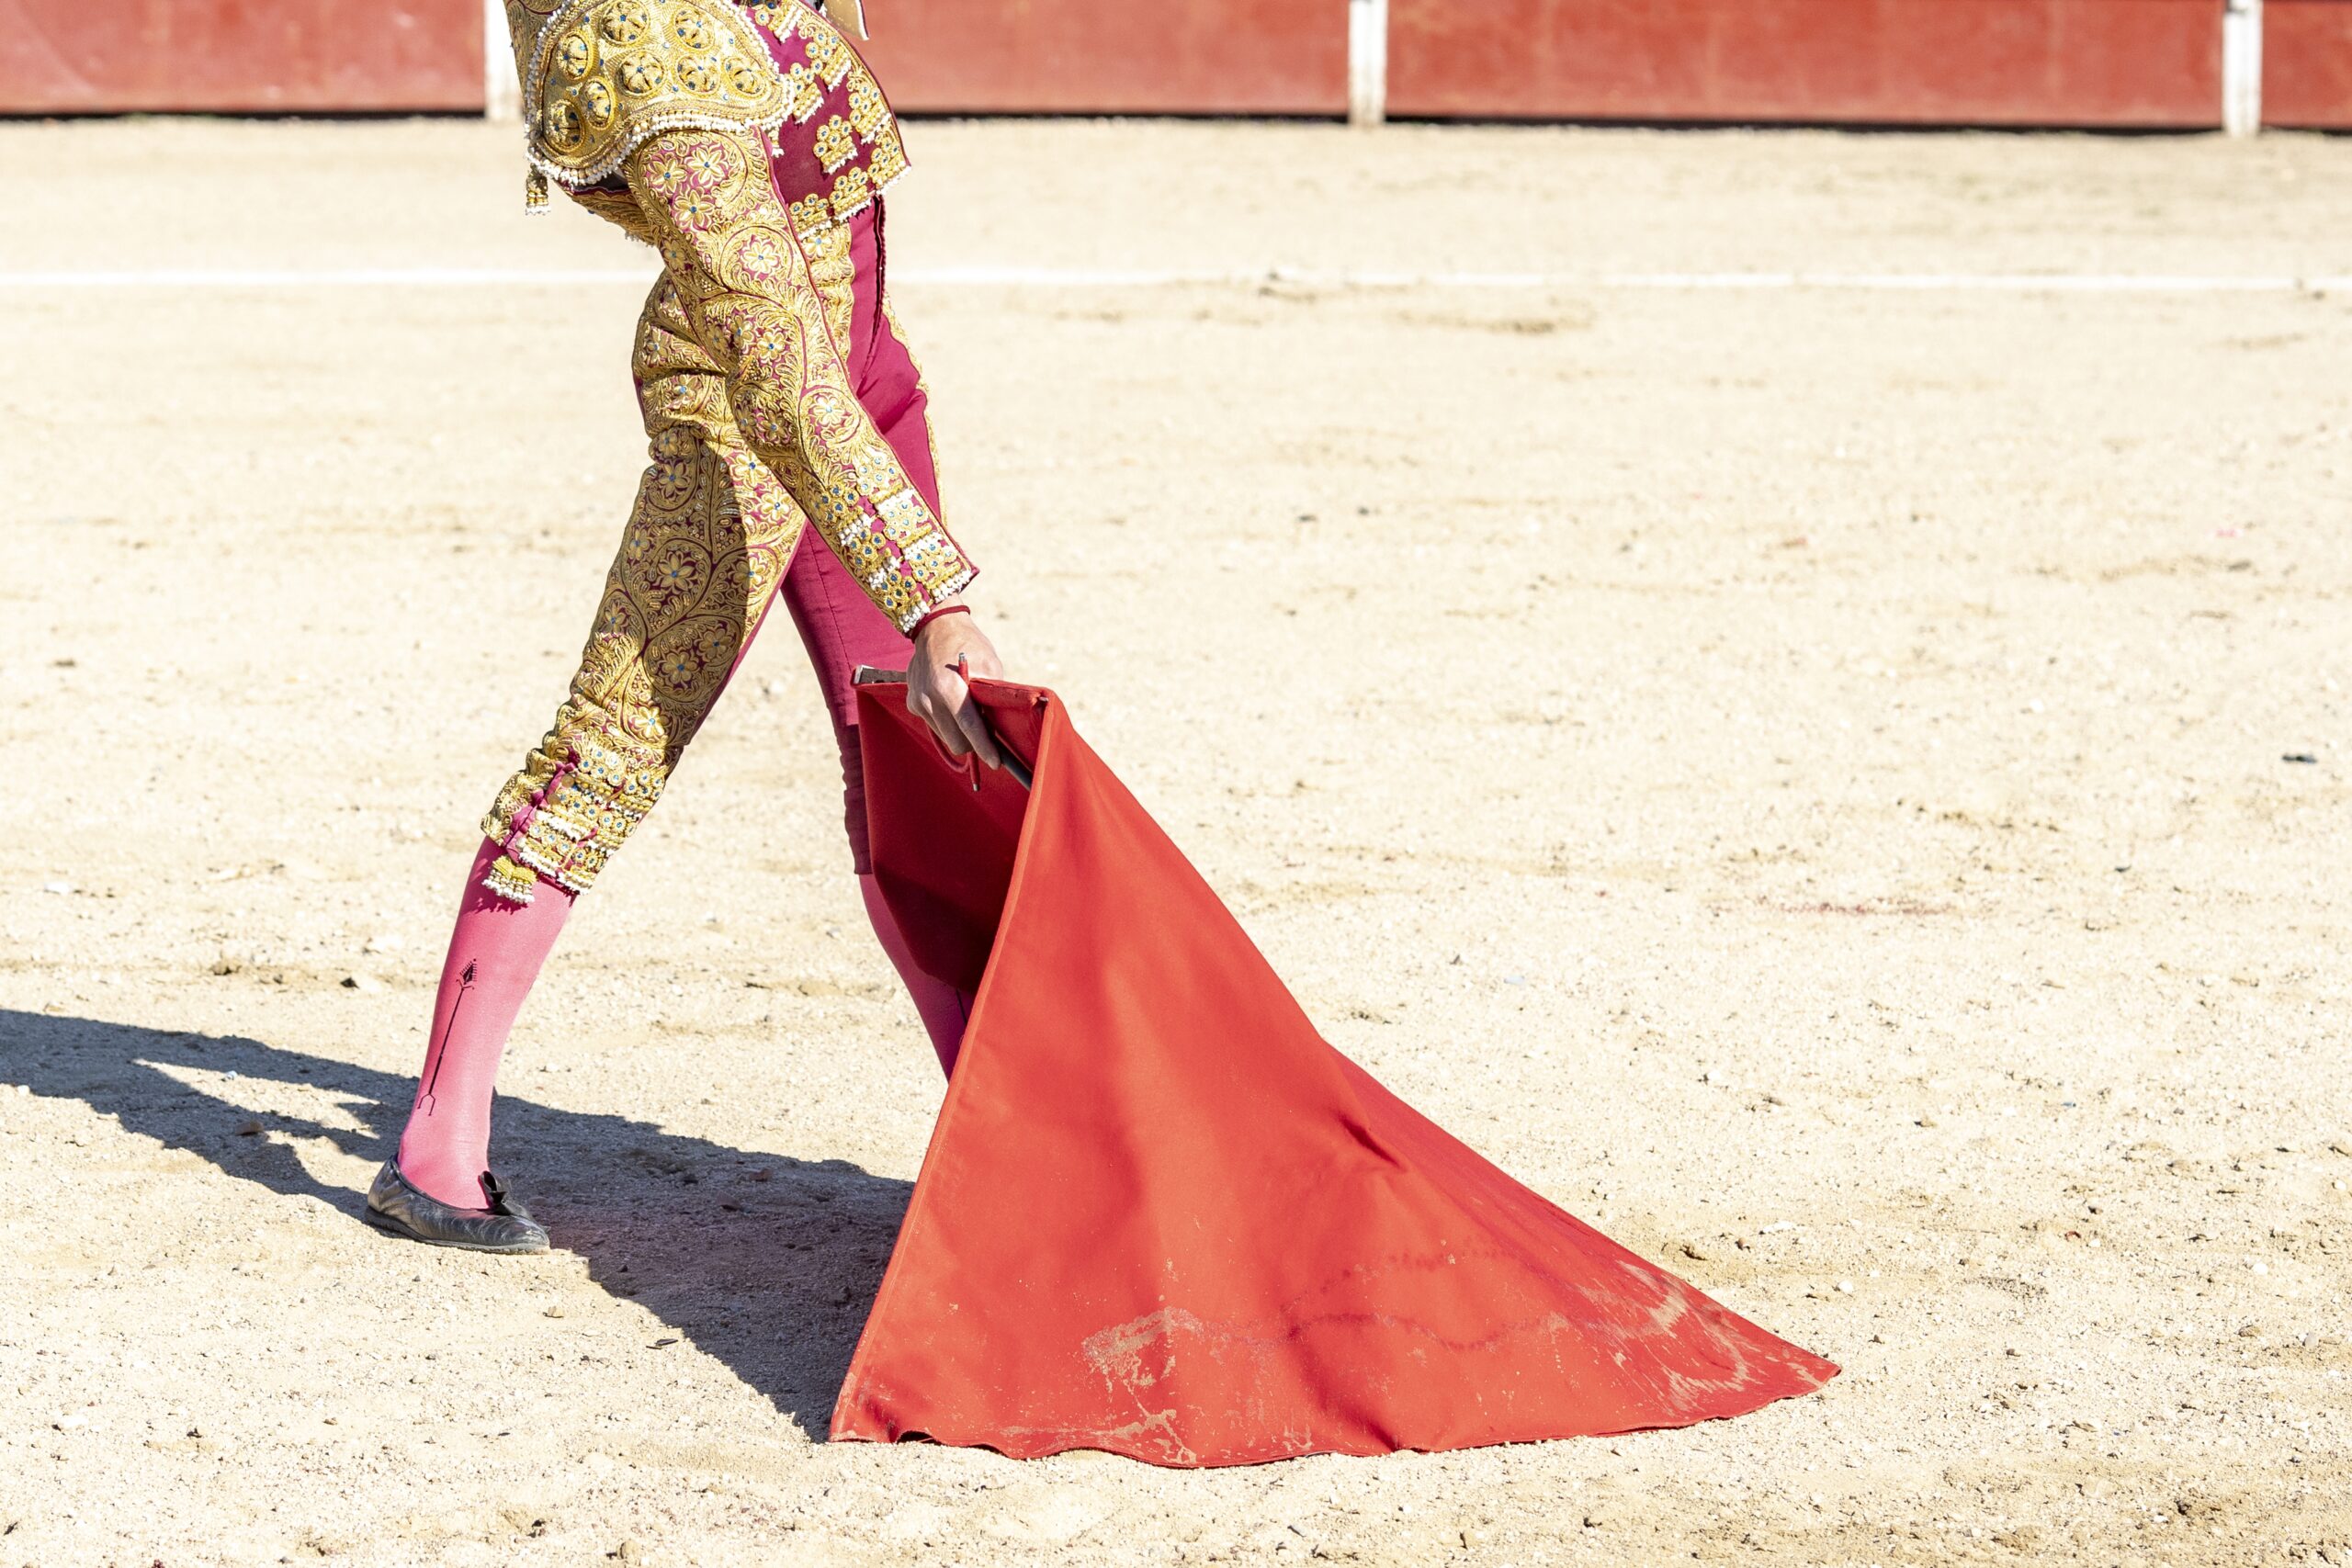 Picture of a bullfighter or matador in traditional clothes and red fabric